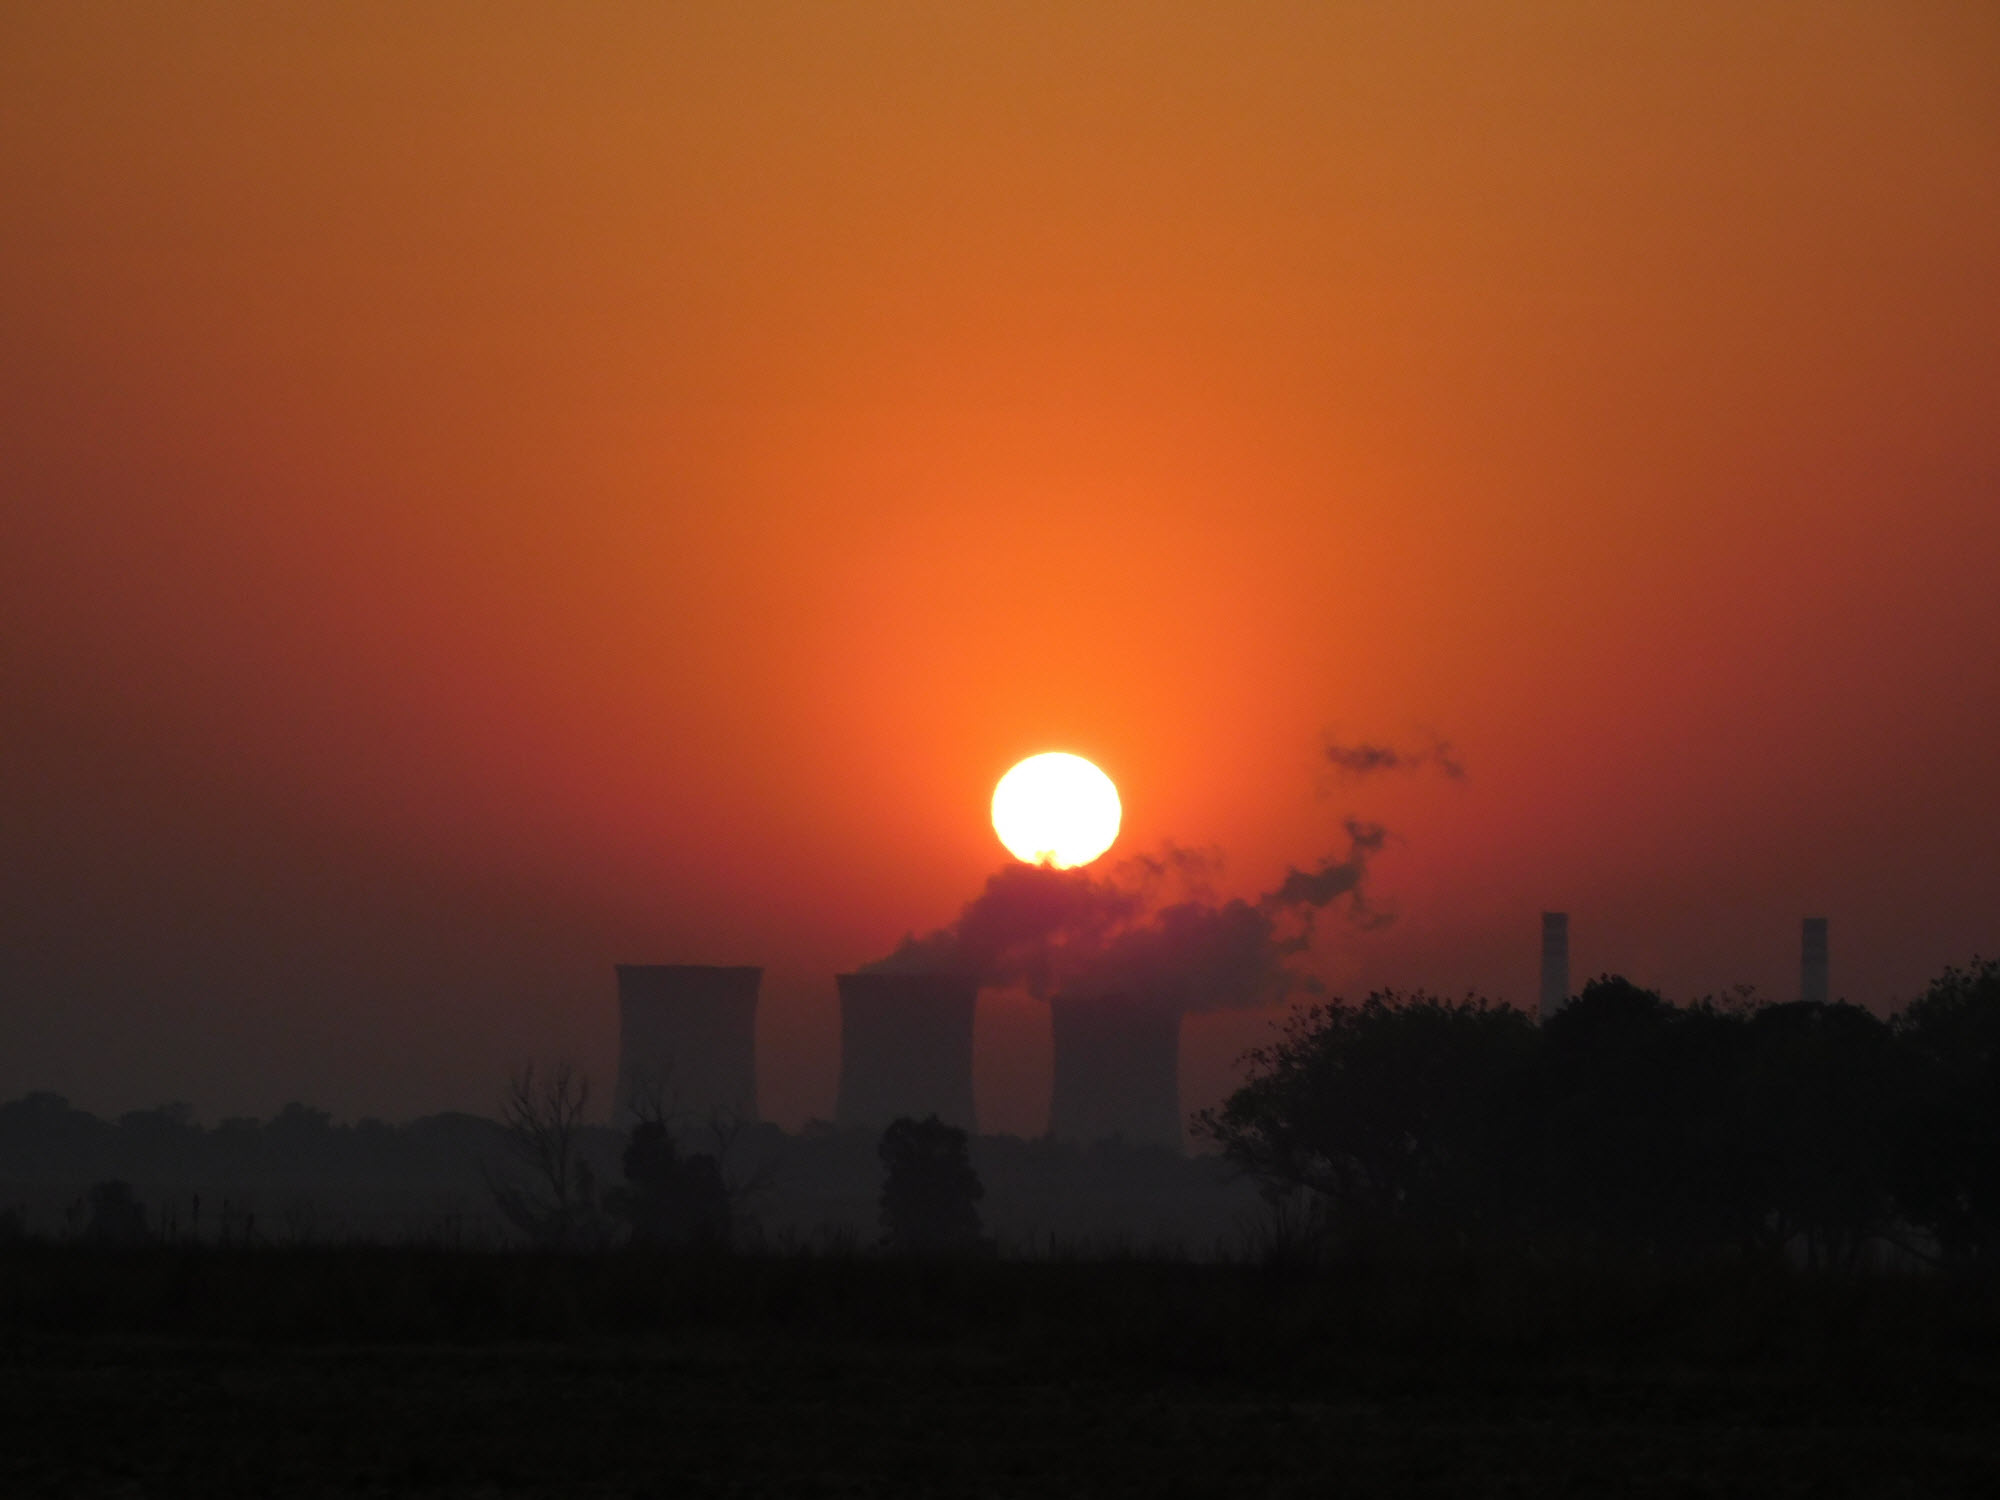 Sunrise over Grootvlei power station as seen from the N3 between Heidelberg and Villiers on our way from Johannesburg to Durban